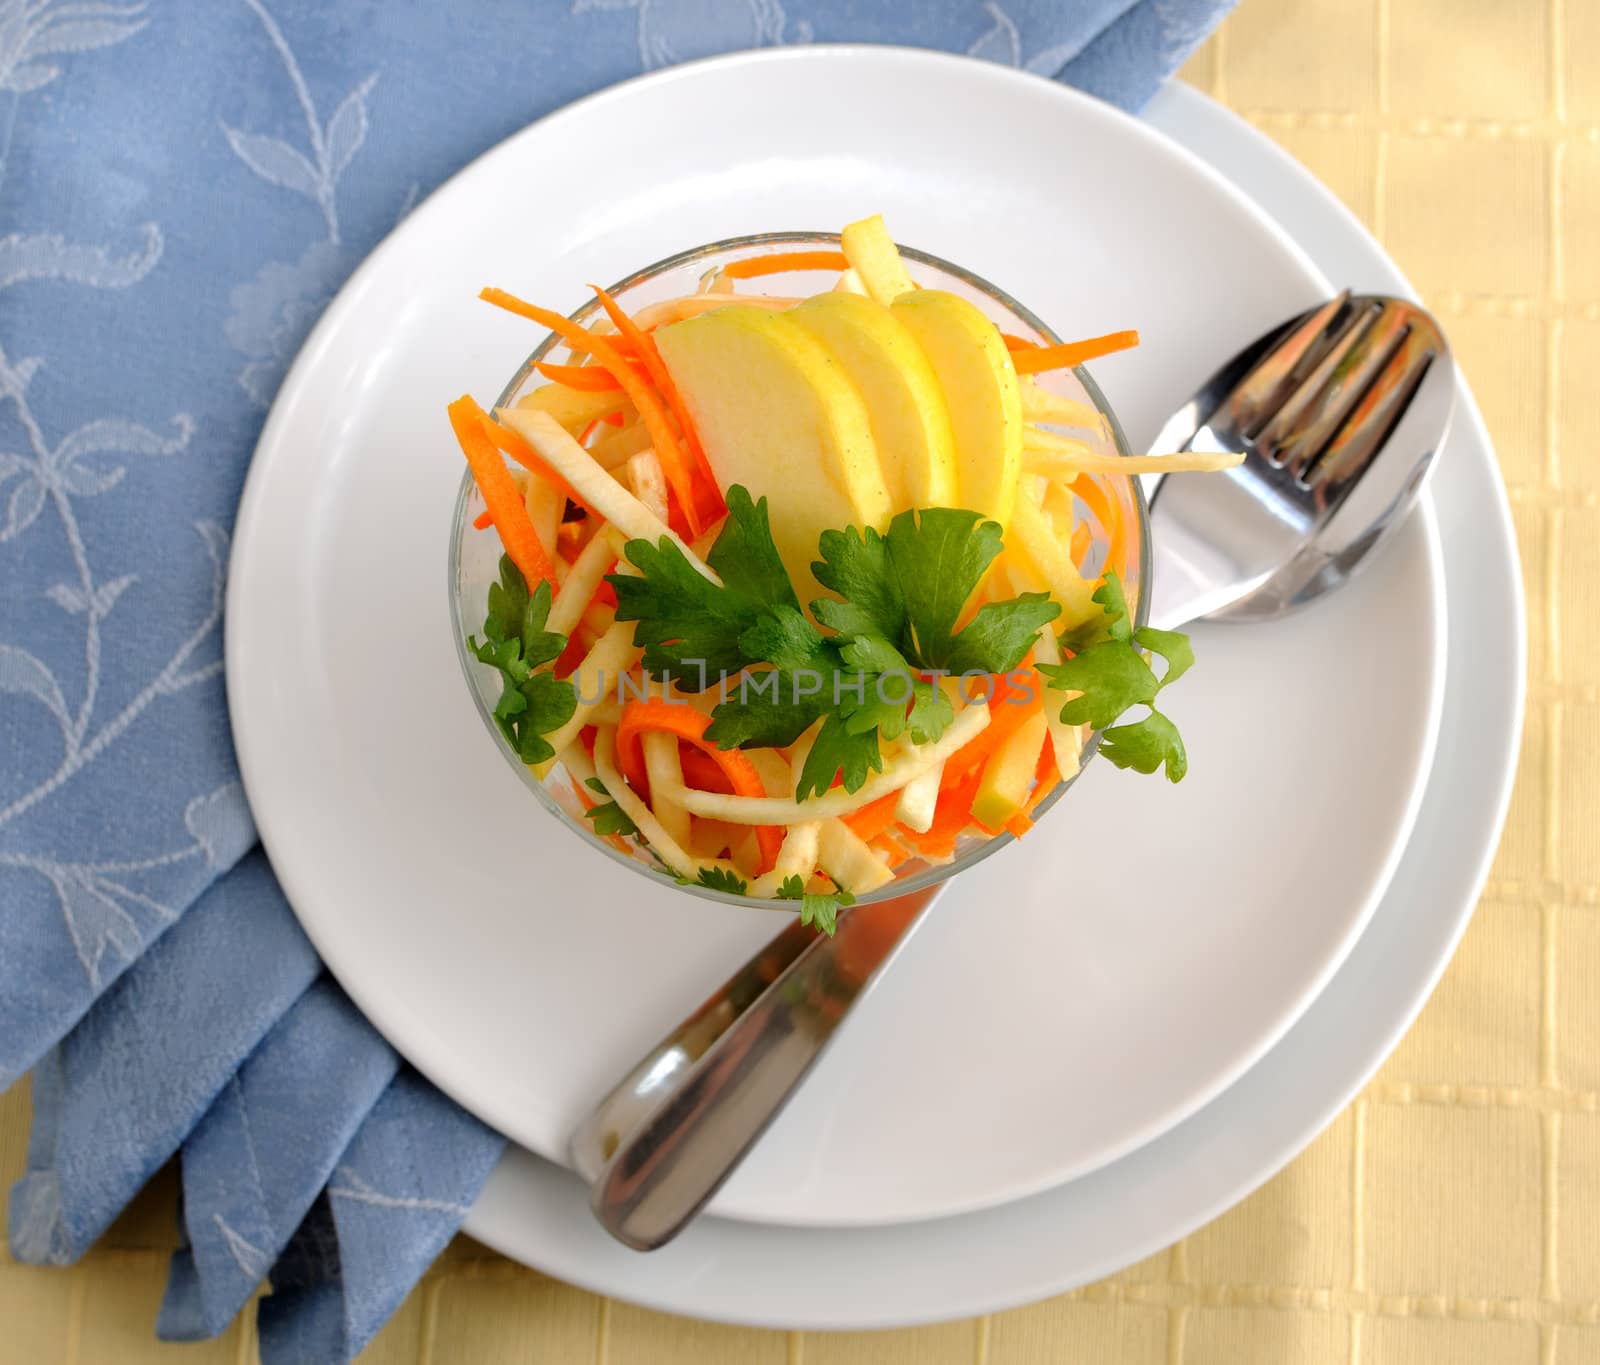  Celery salad with carrot and apple by Apolonia